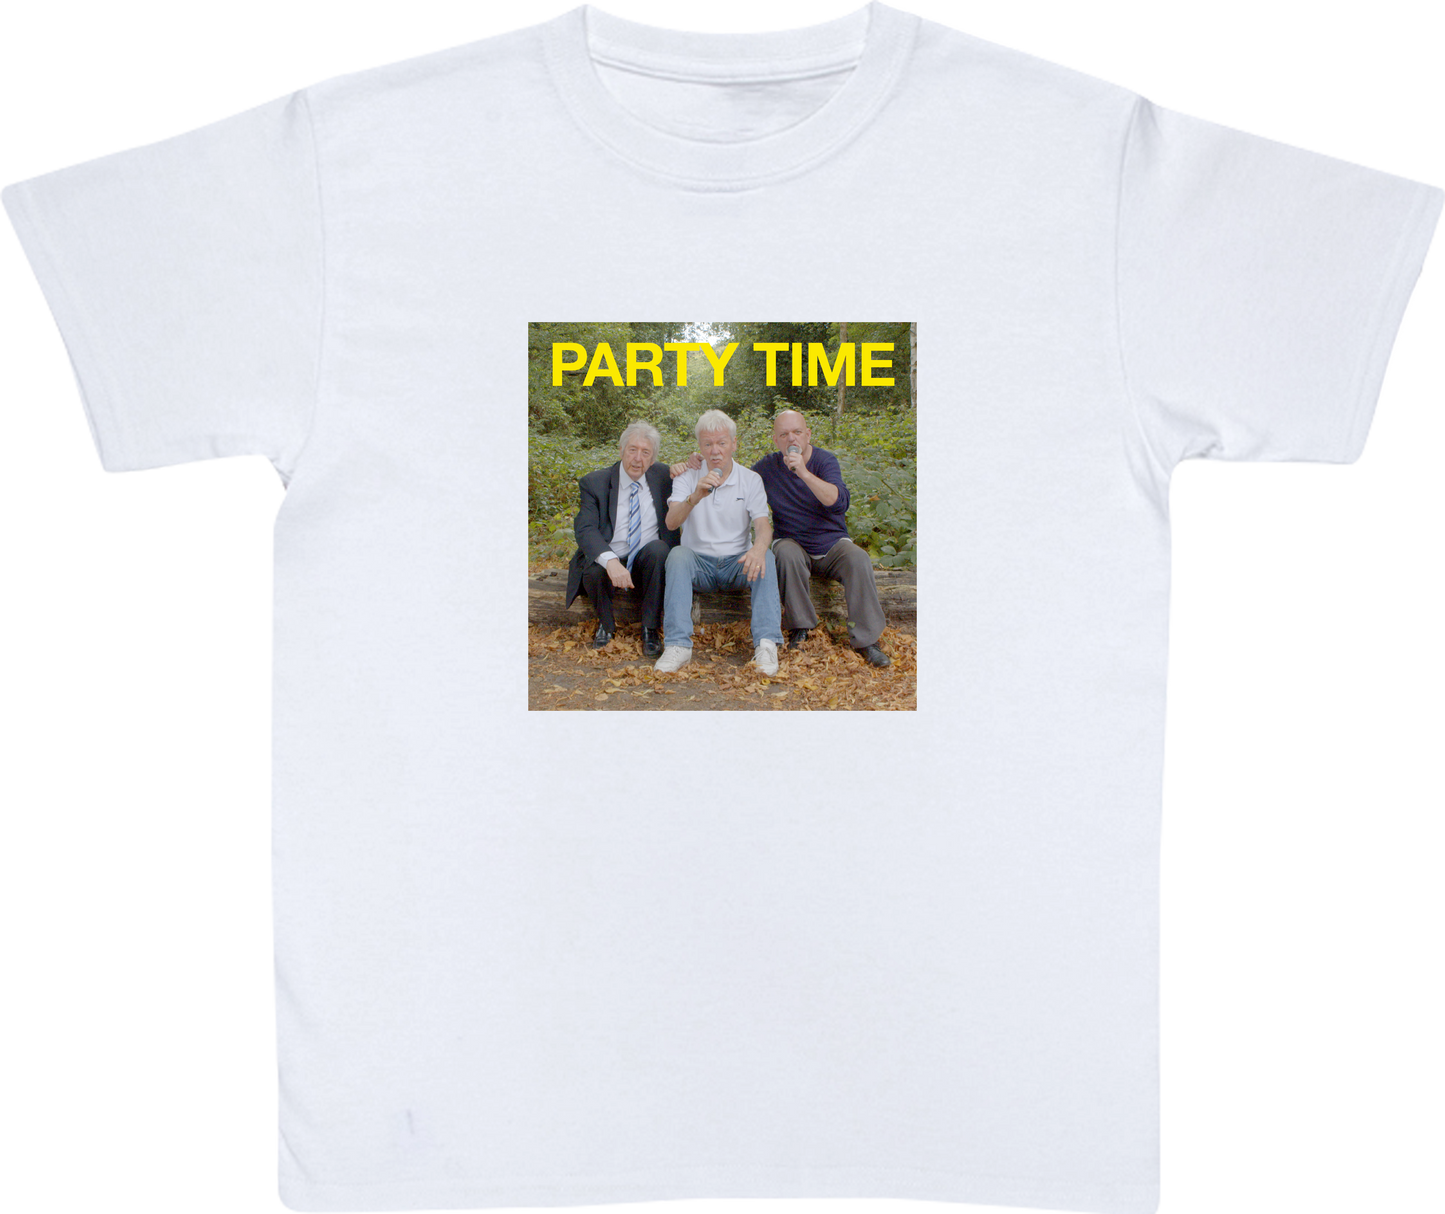 Party Time T-shirt